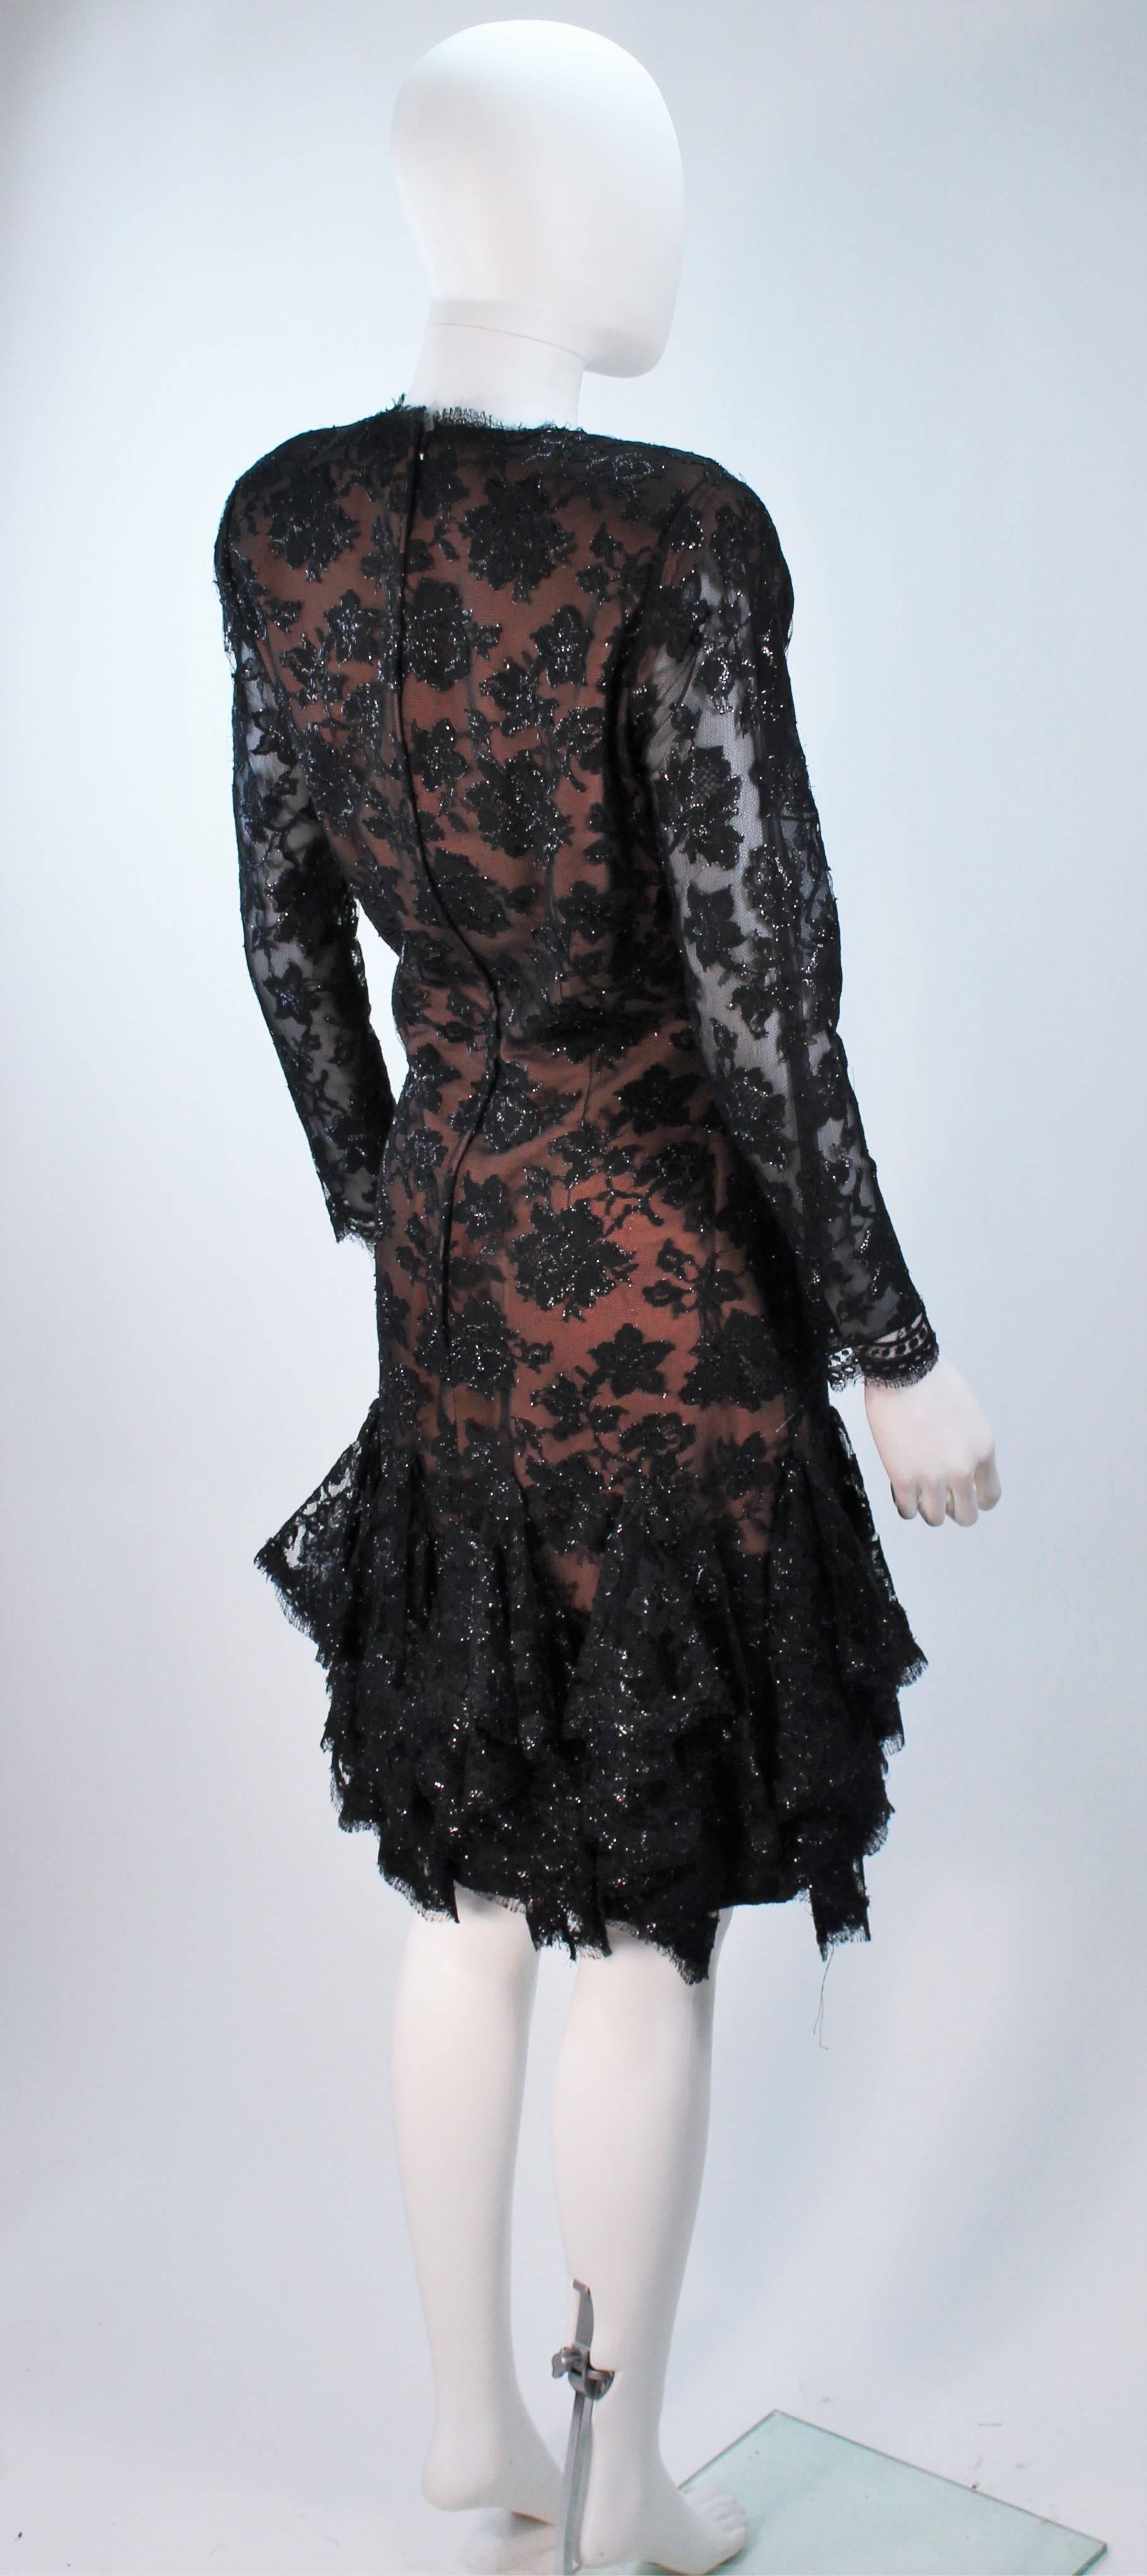 TRAVILLA Black on Black Lace Lame Cocktail Dress with Ruffle Hem Size 8 For Sale 4